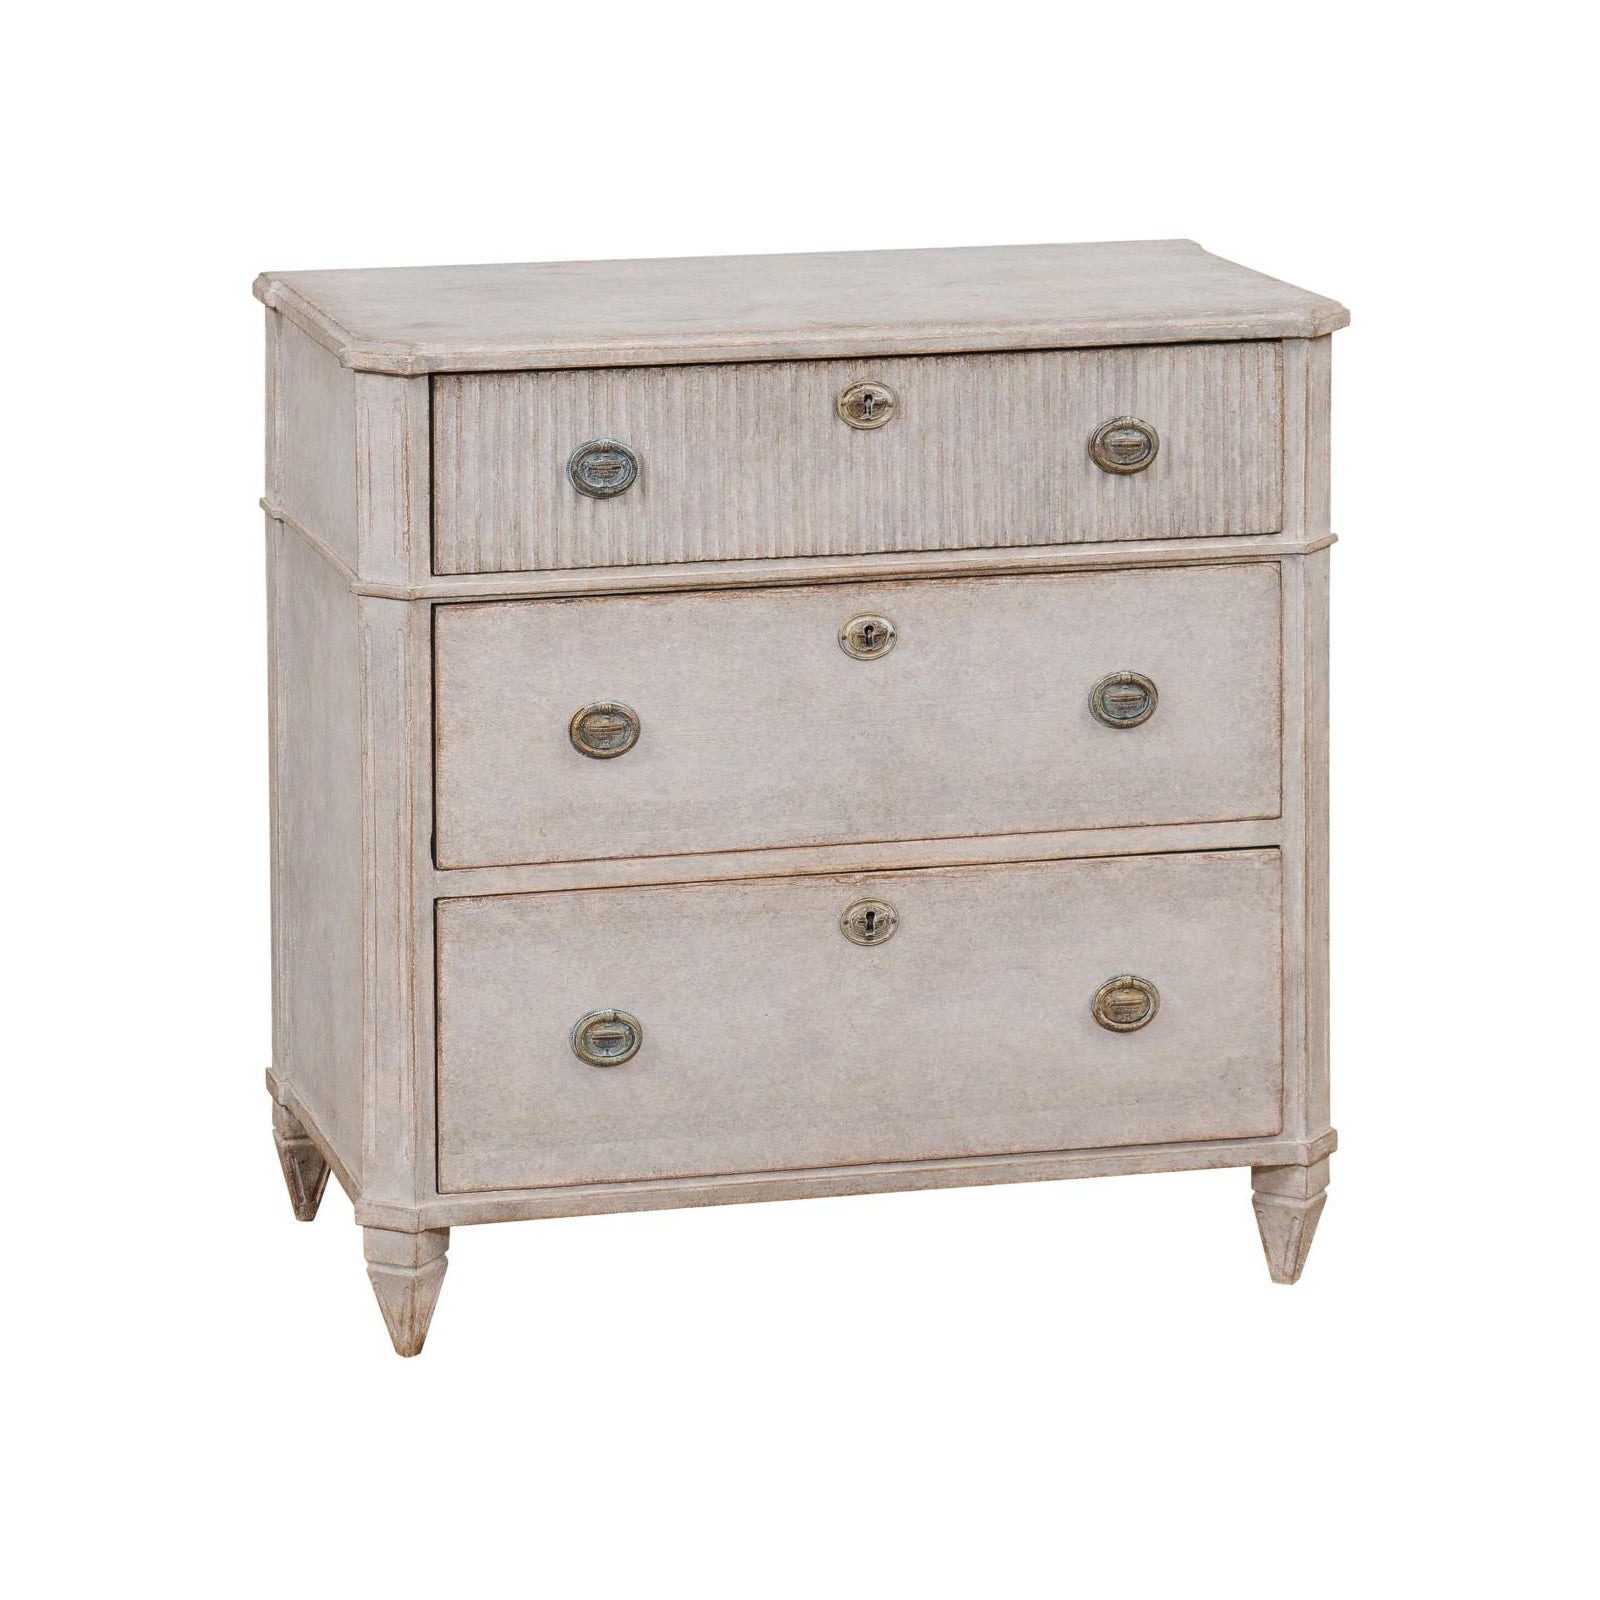 Swedish 1890s Gustavian Style Gray Painted Three Drawer Chest with Reeded Motifs